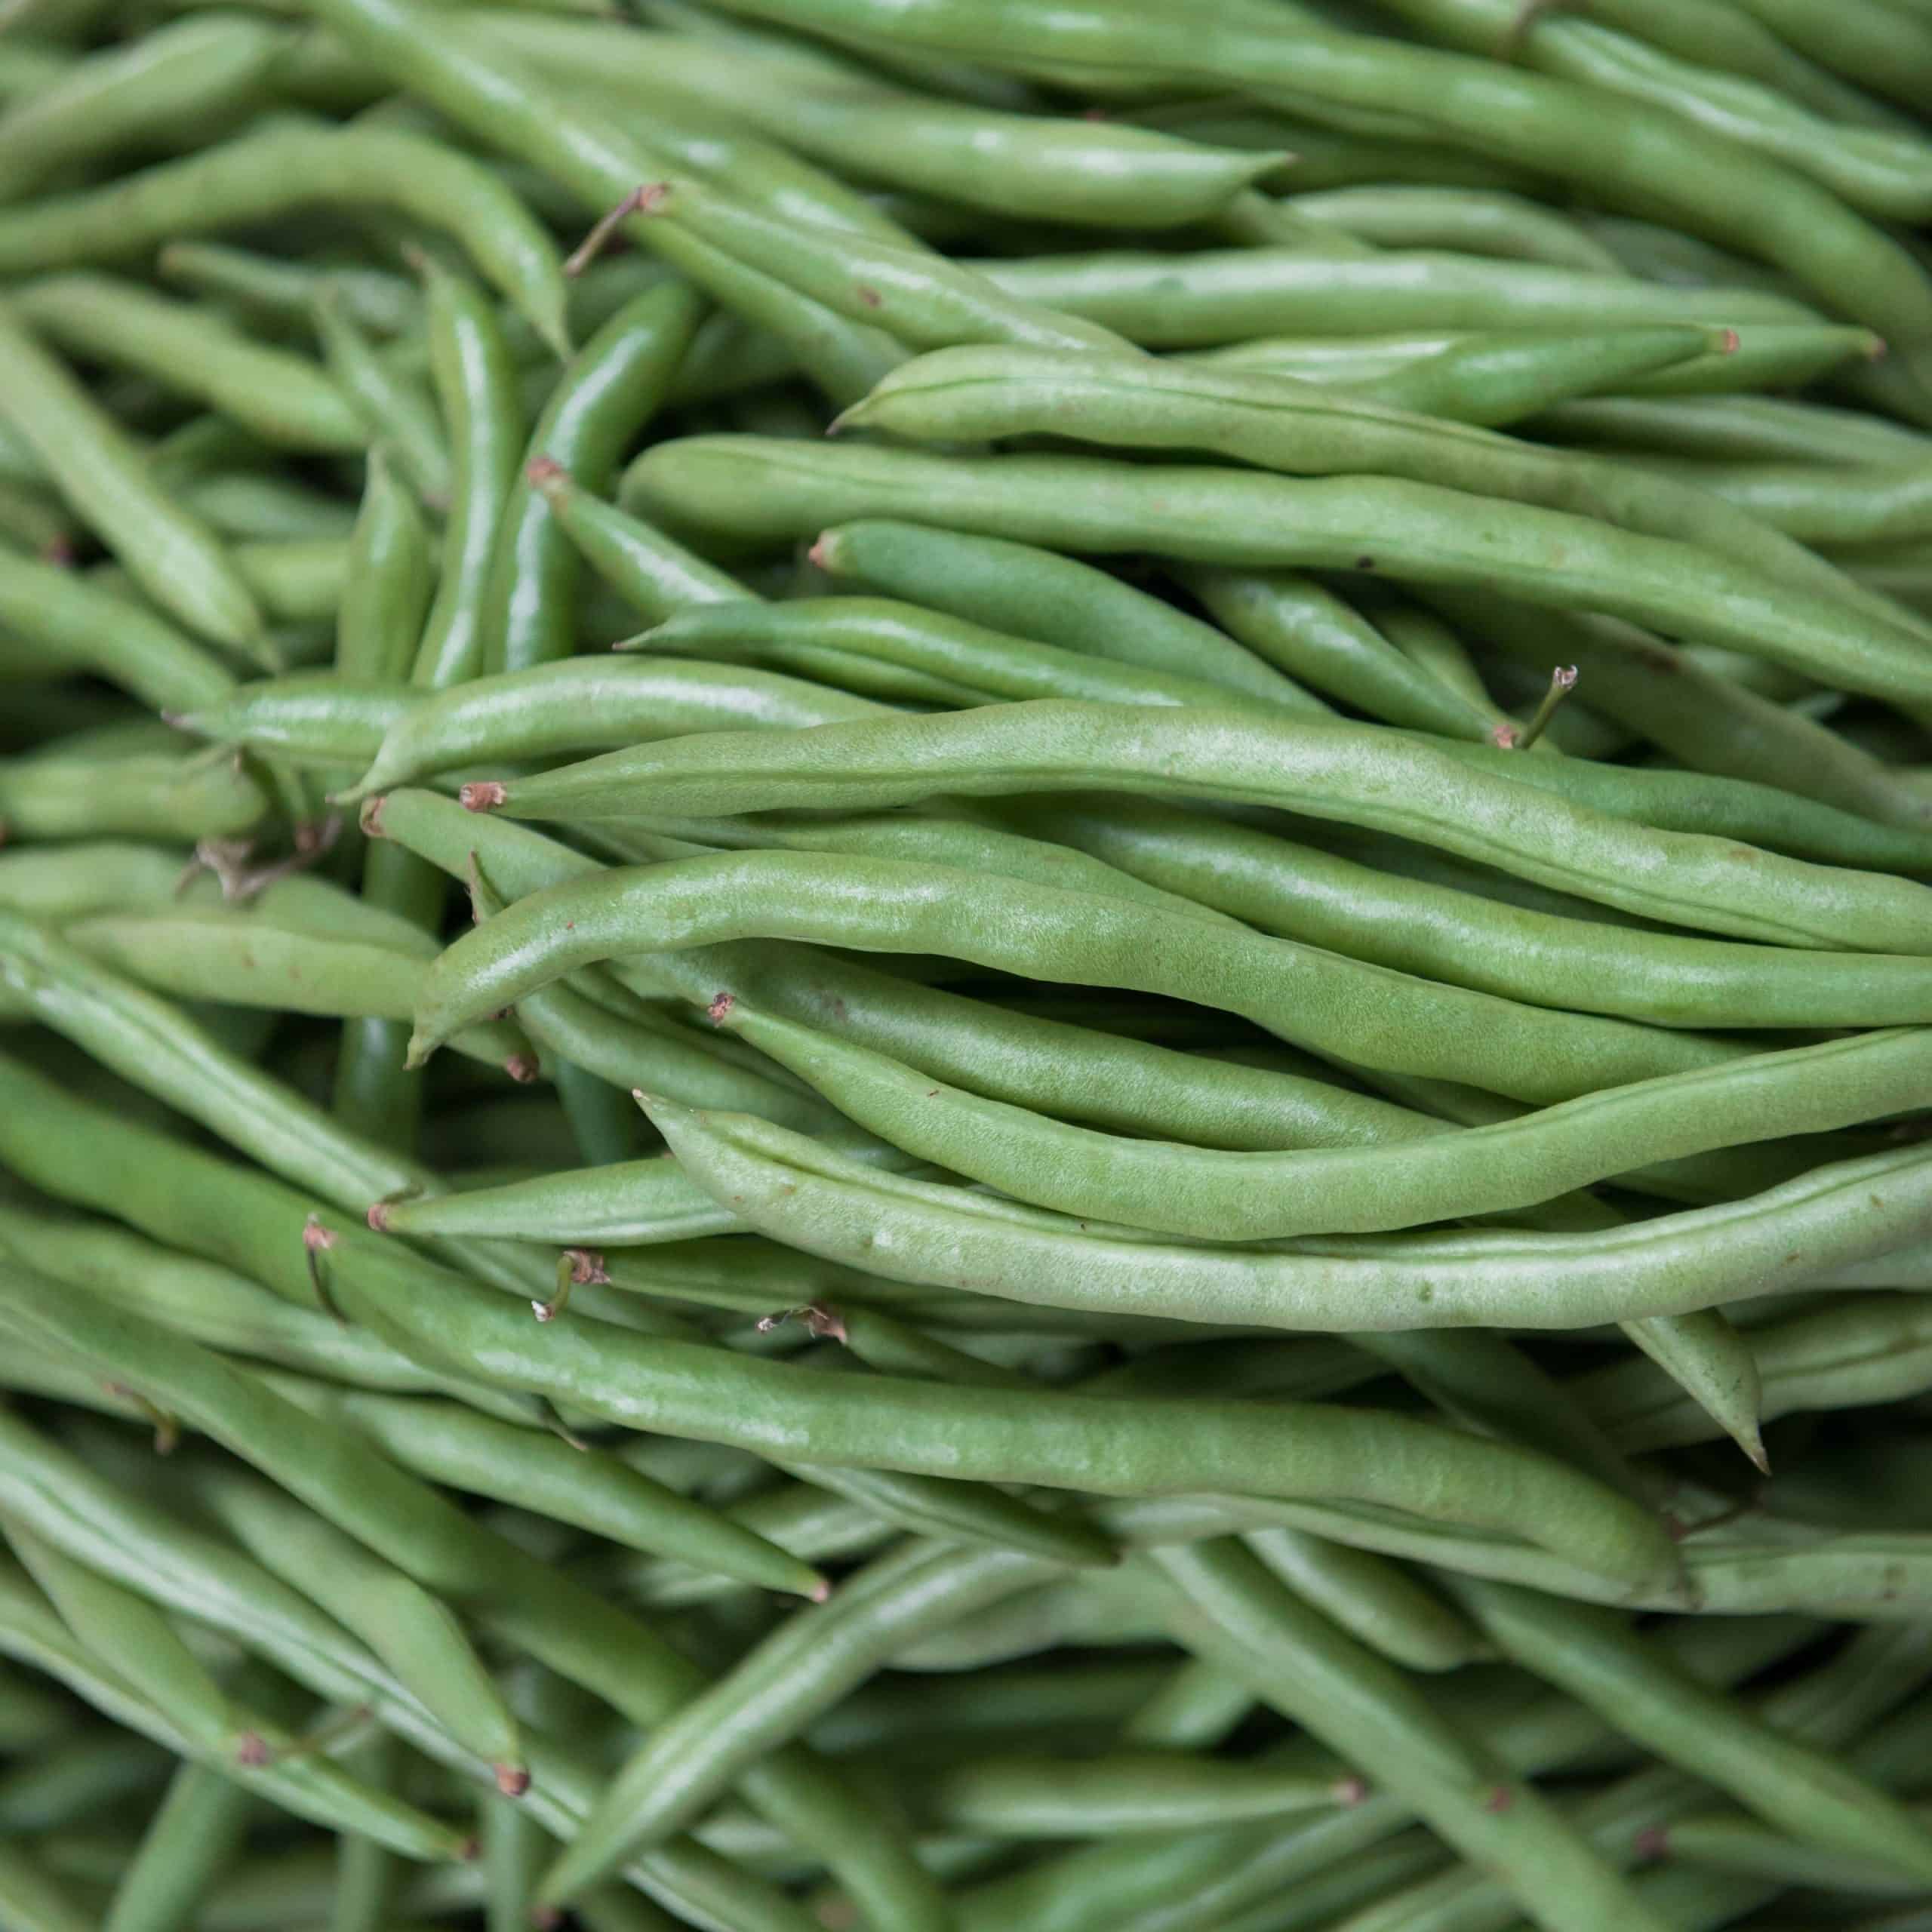 Are green beans fruits or vegetables?